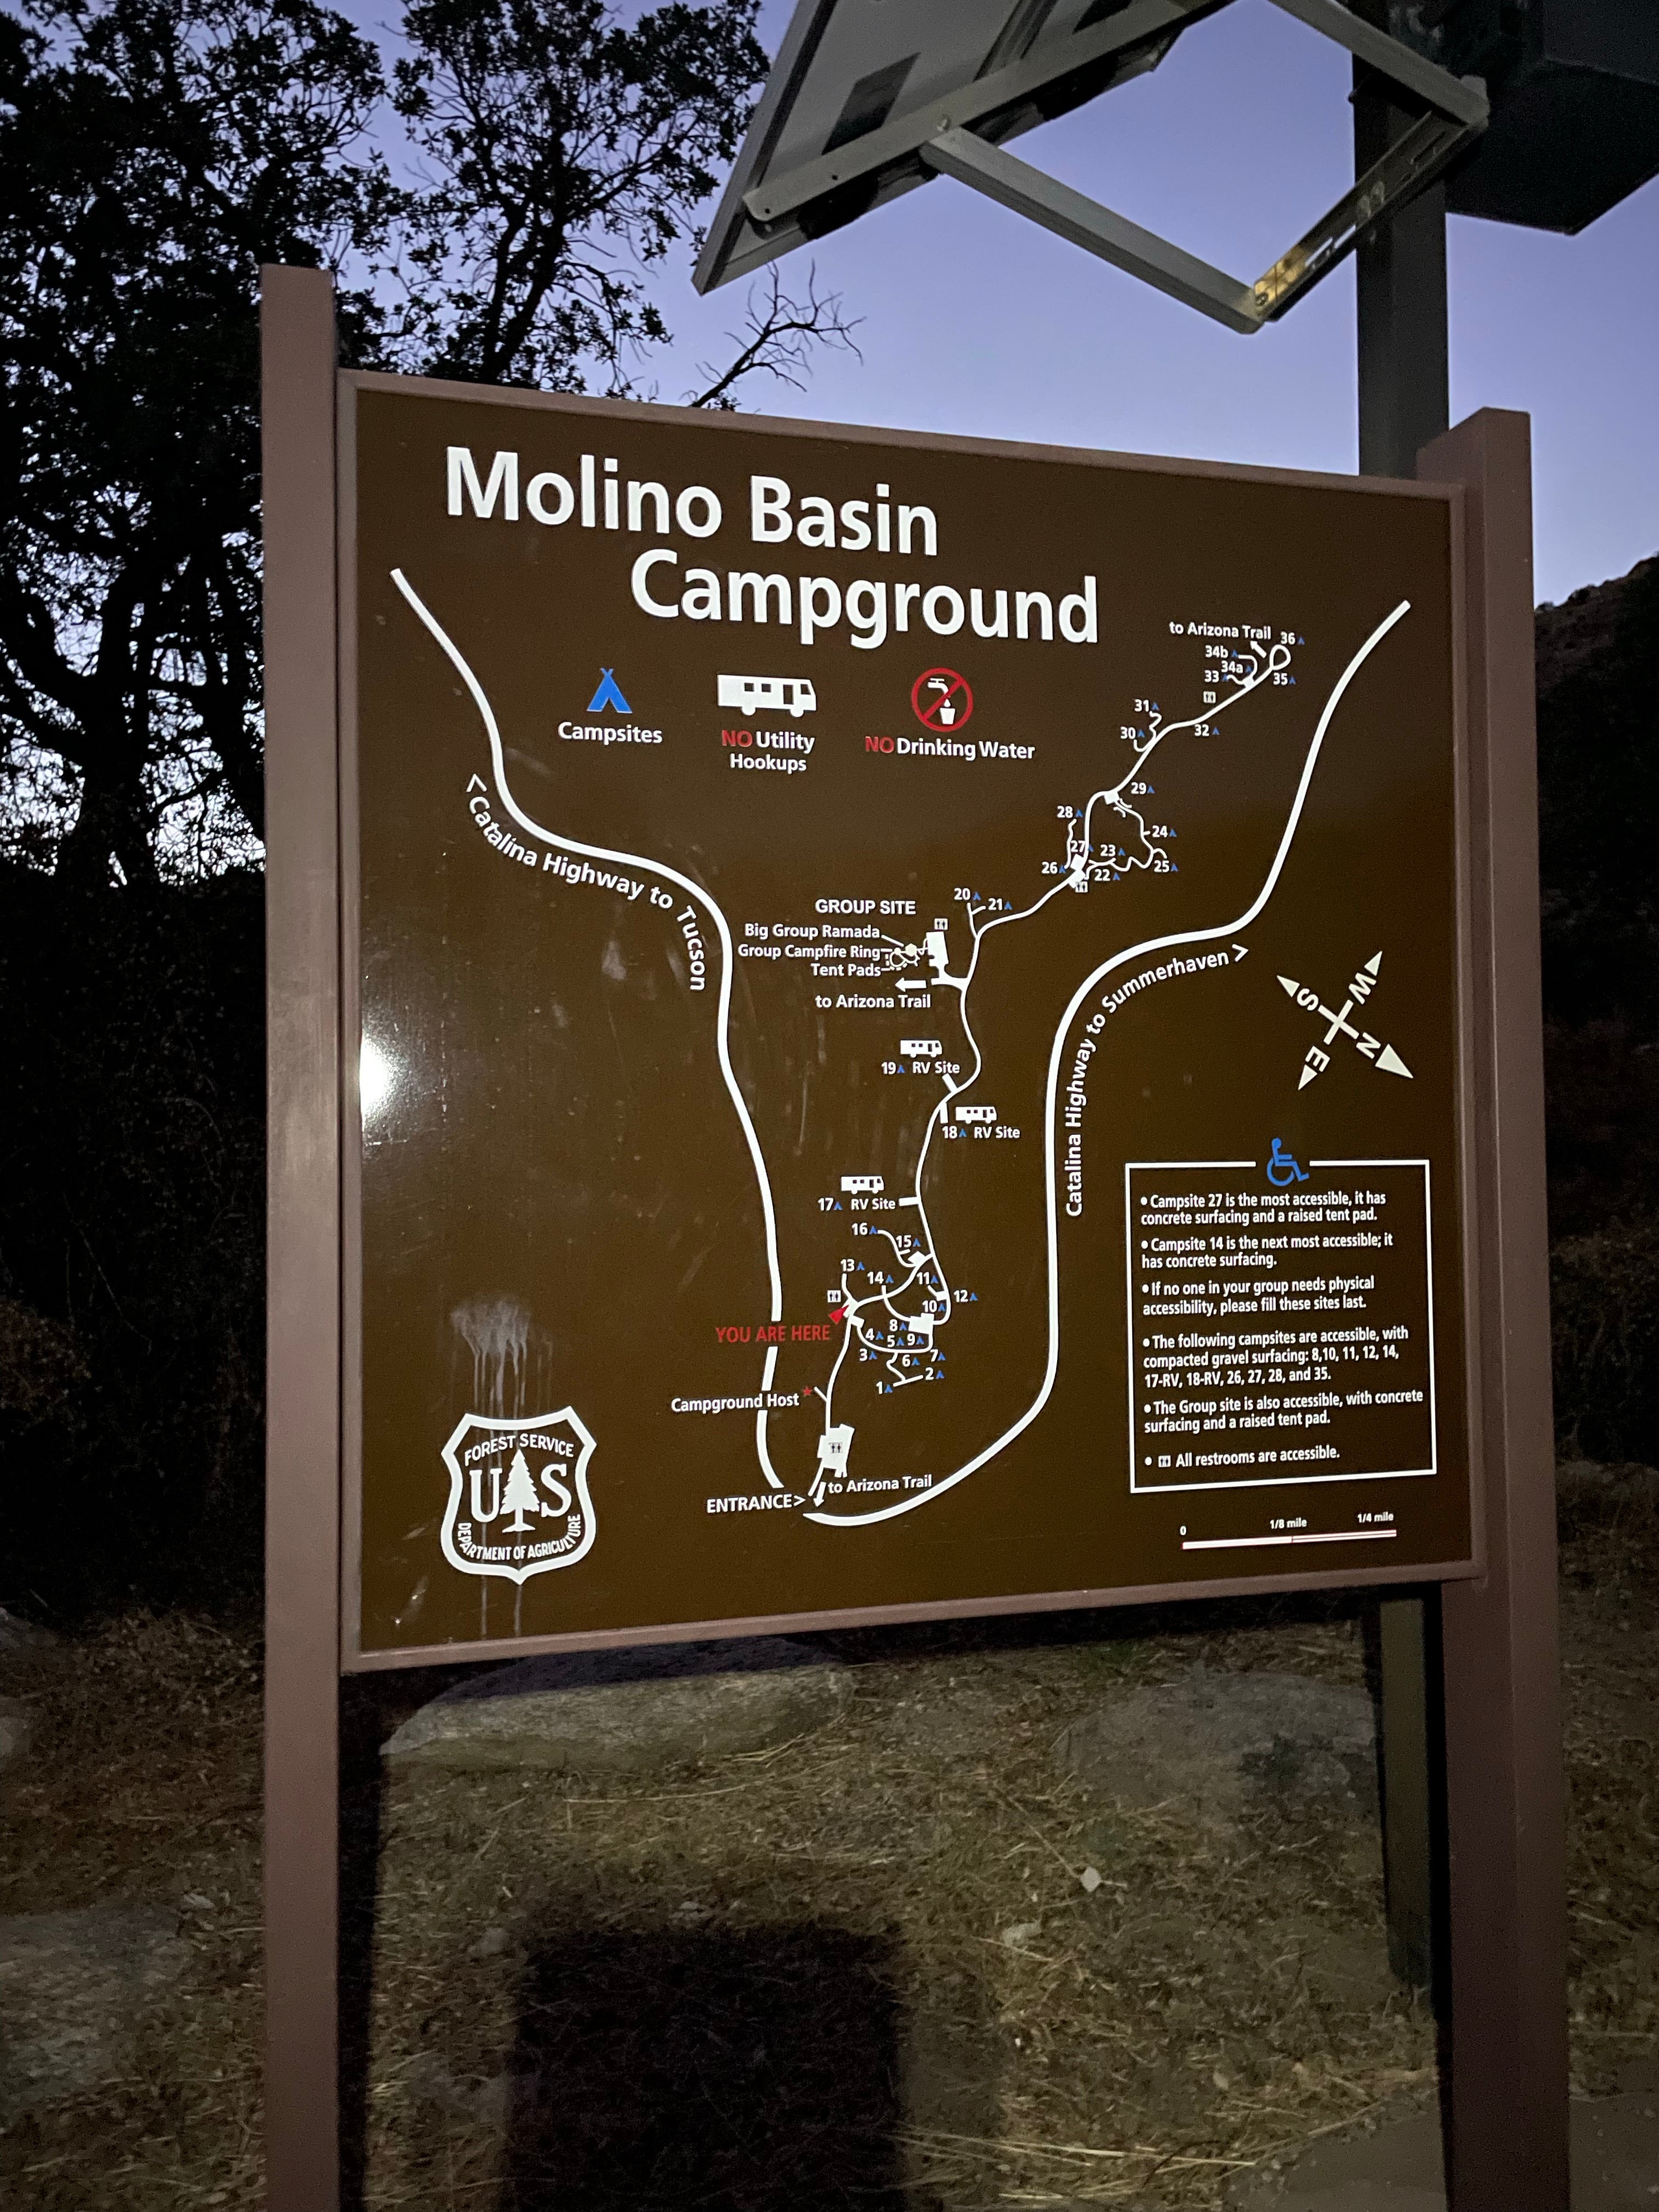 Camper submitted image from Coronado National Forest Molino Basin Campground - 4